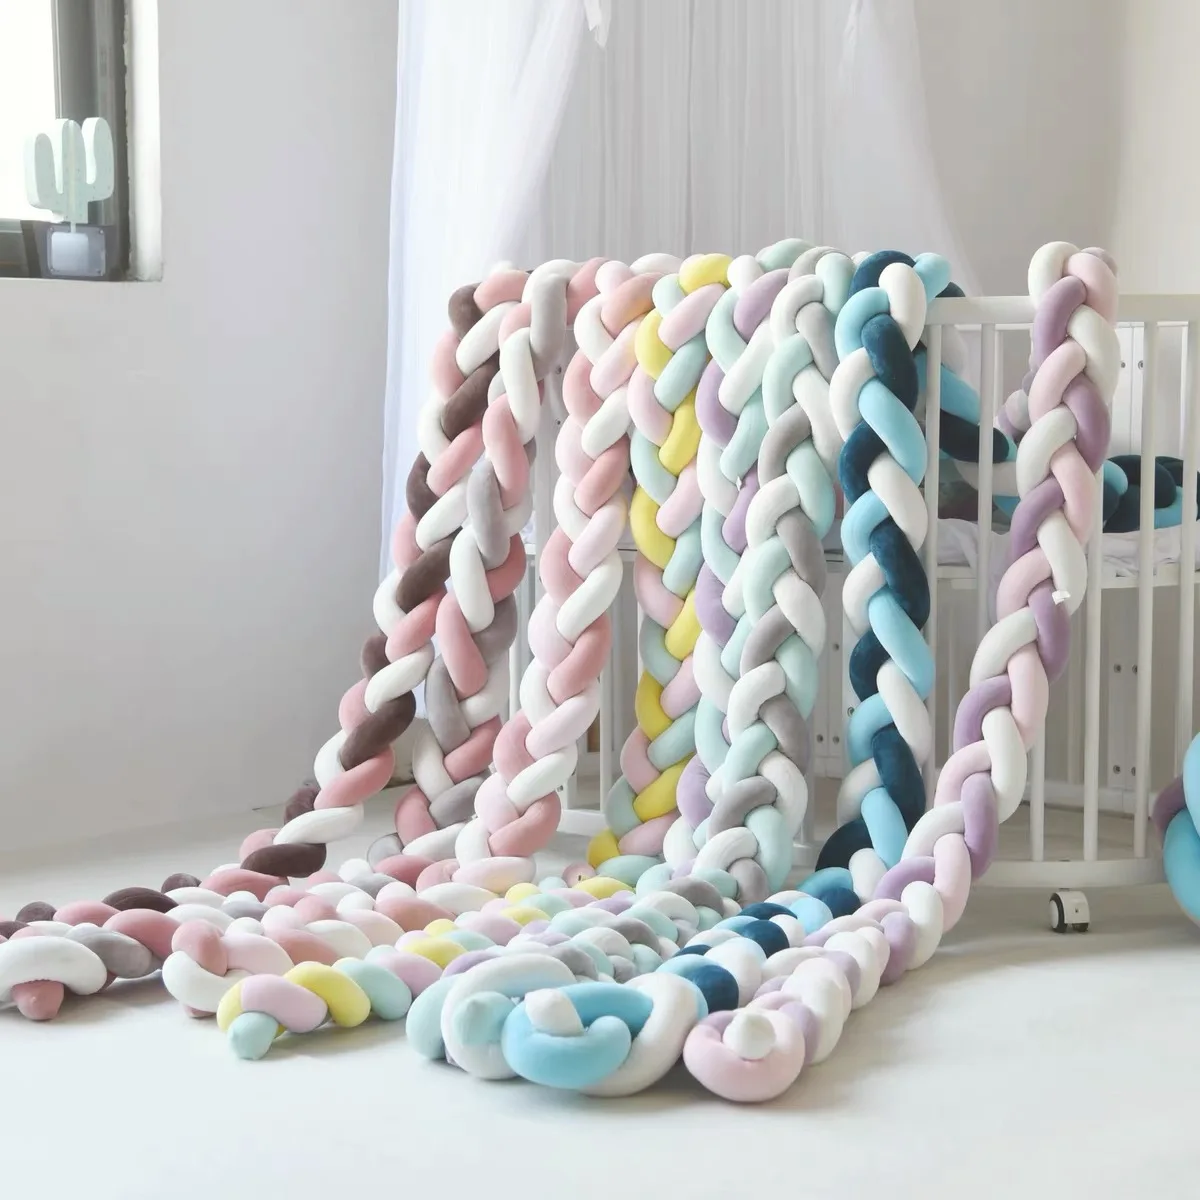 Baby Bumper Crib Cot Protector Infant Bedding Set for Baby Boy Girl Braid Knot Pillow Cushion Room Decor